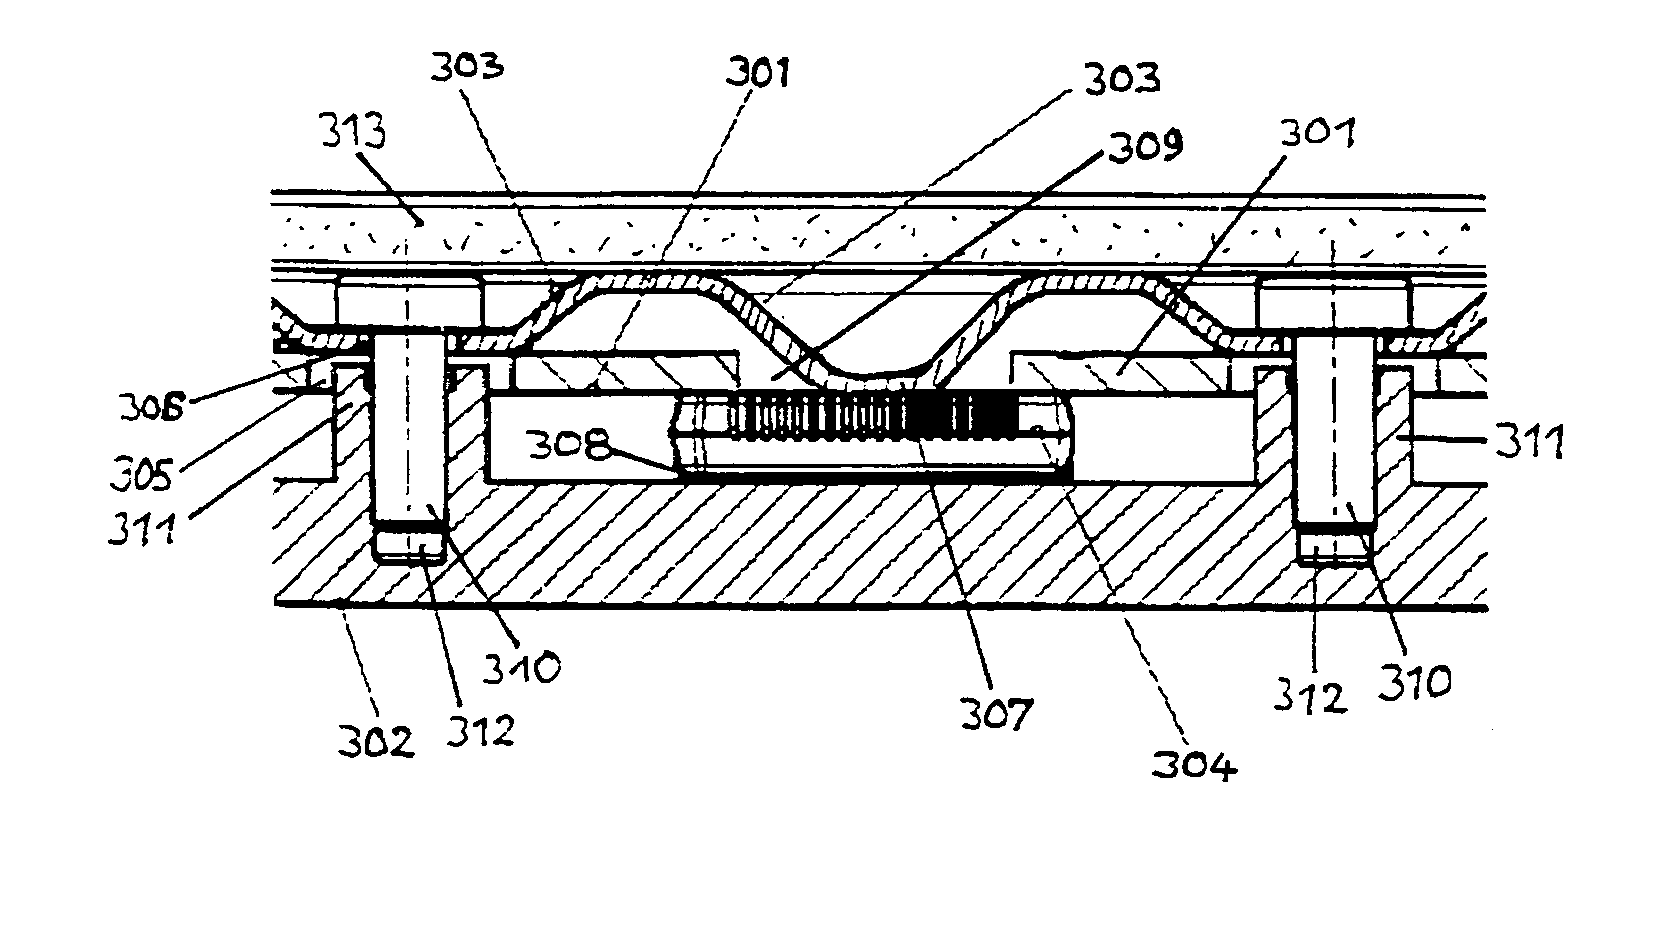 Apparatus for cooling semiconductor devices attached to a printed circuit board